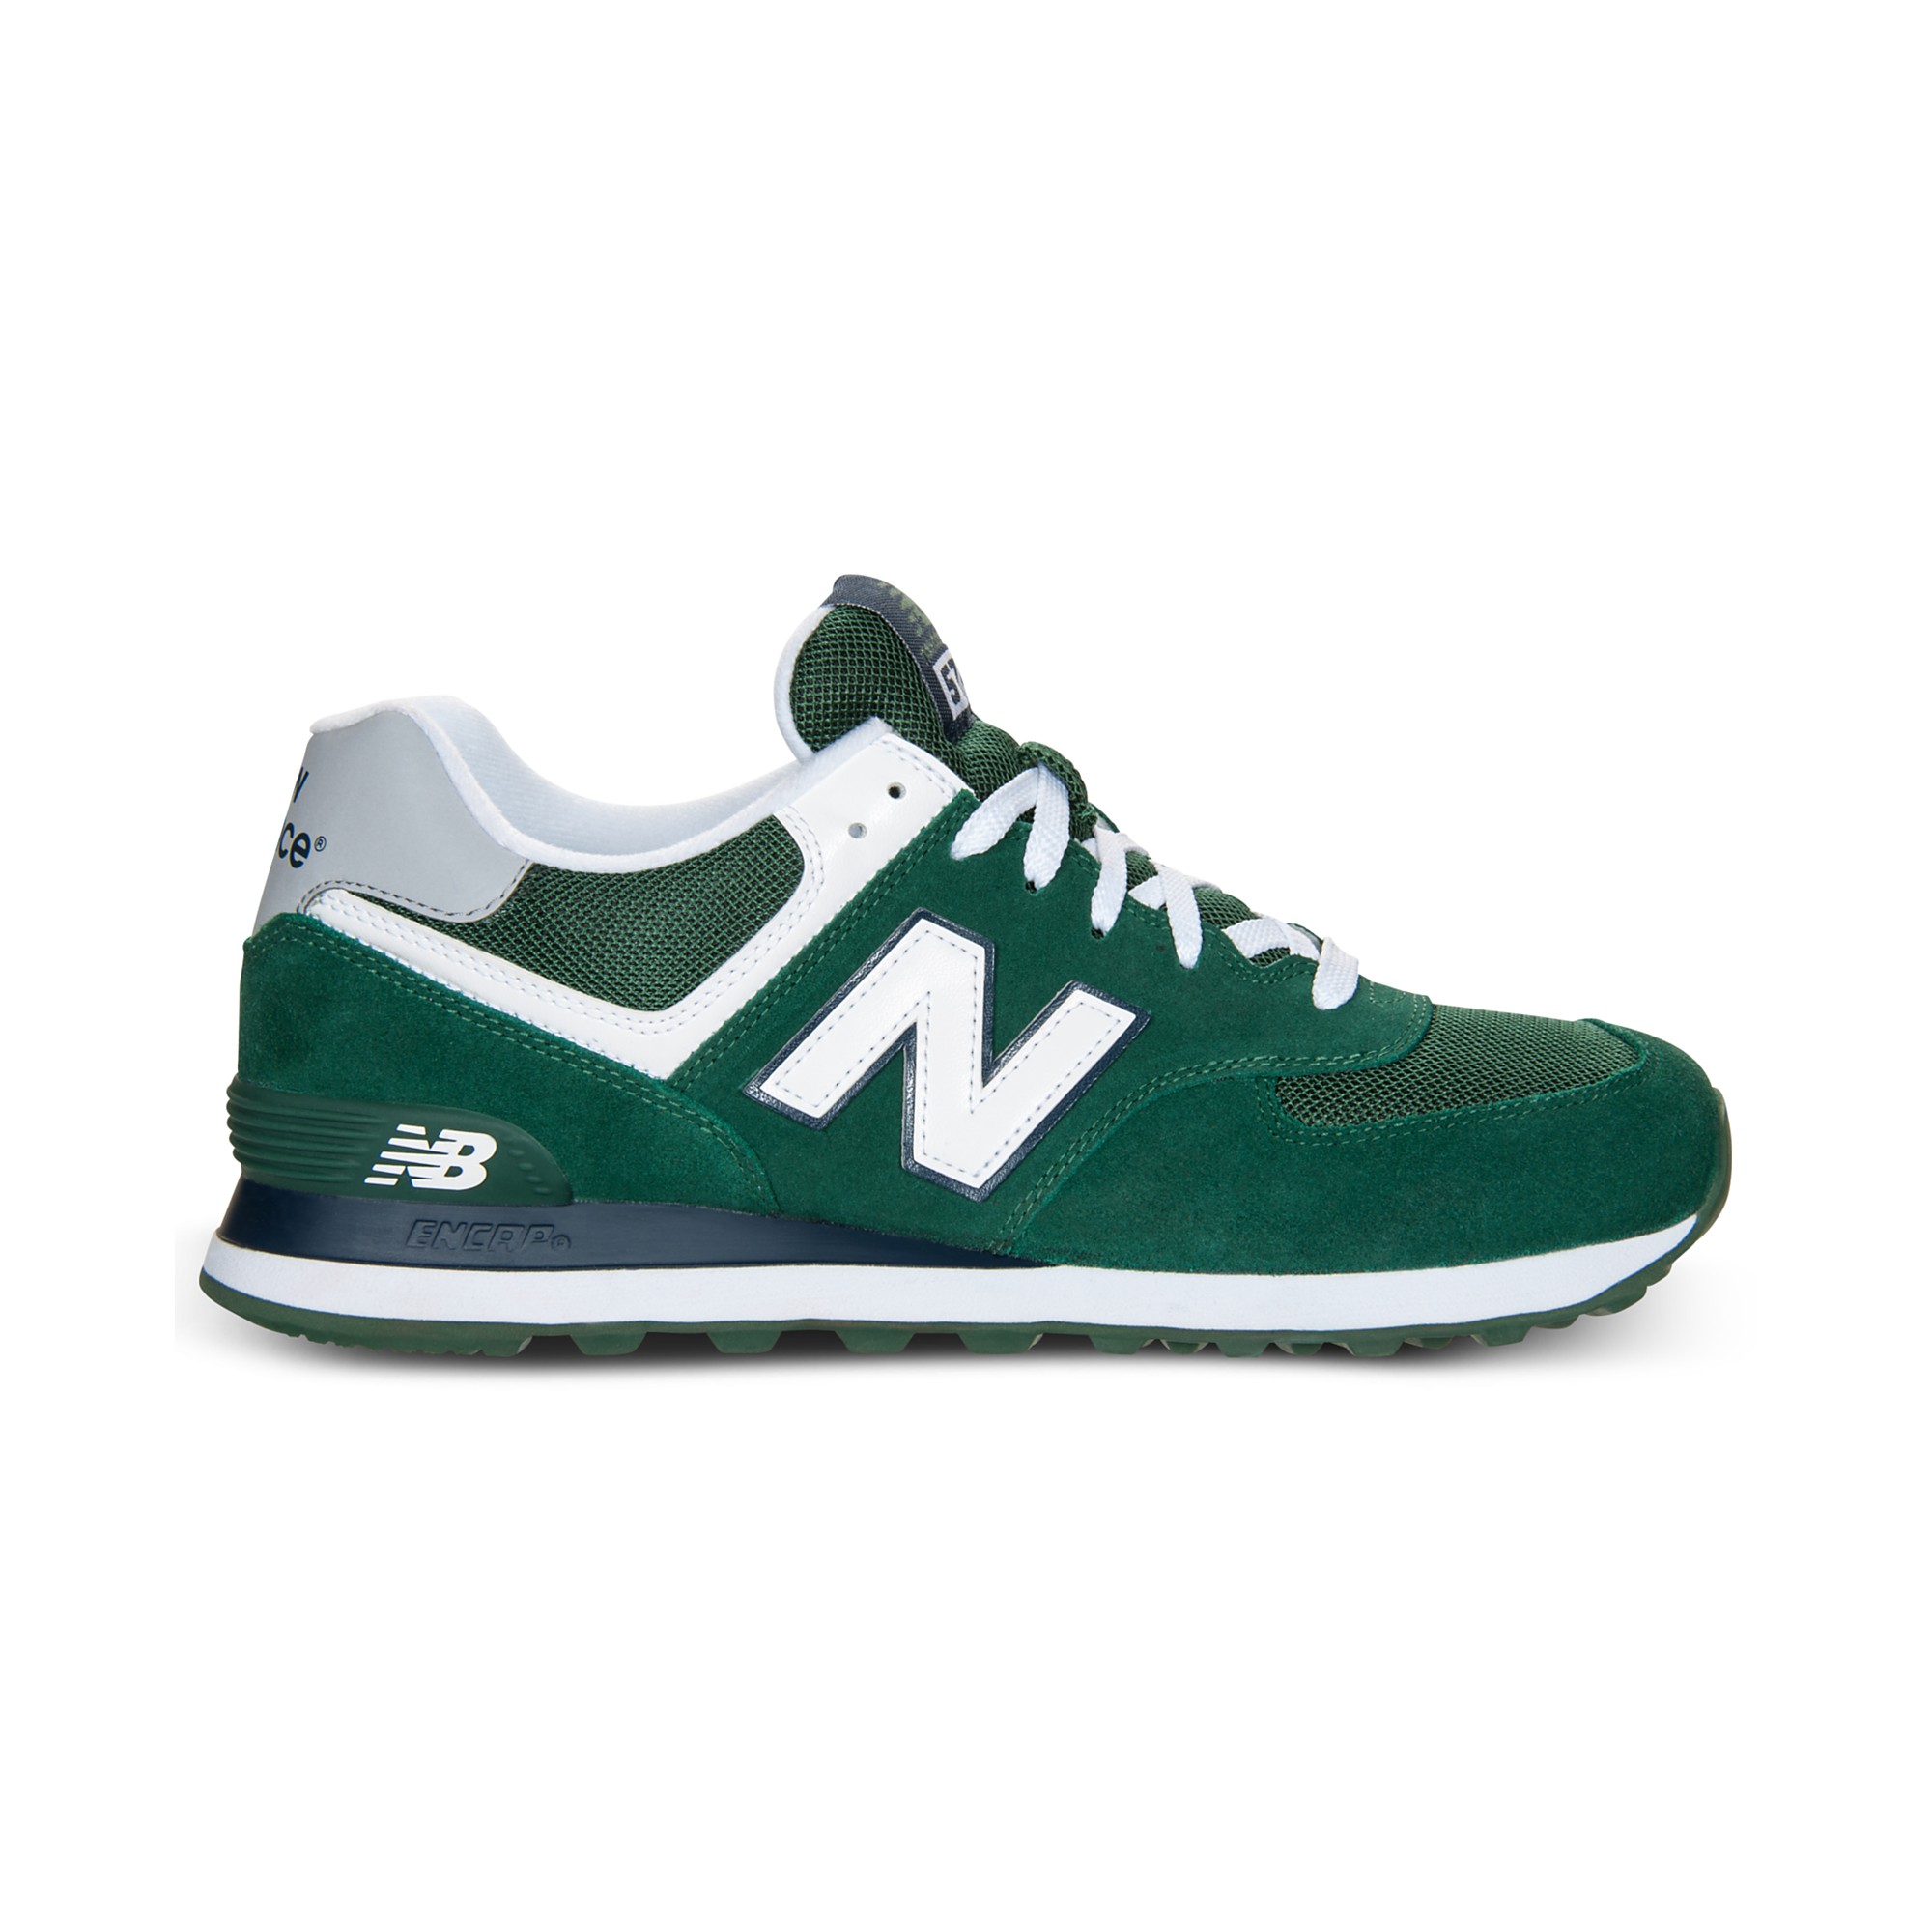 New Balance Sneakers in Green for Men - Lyst